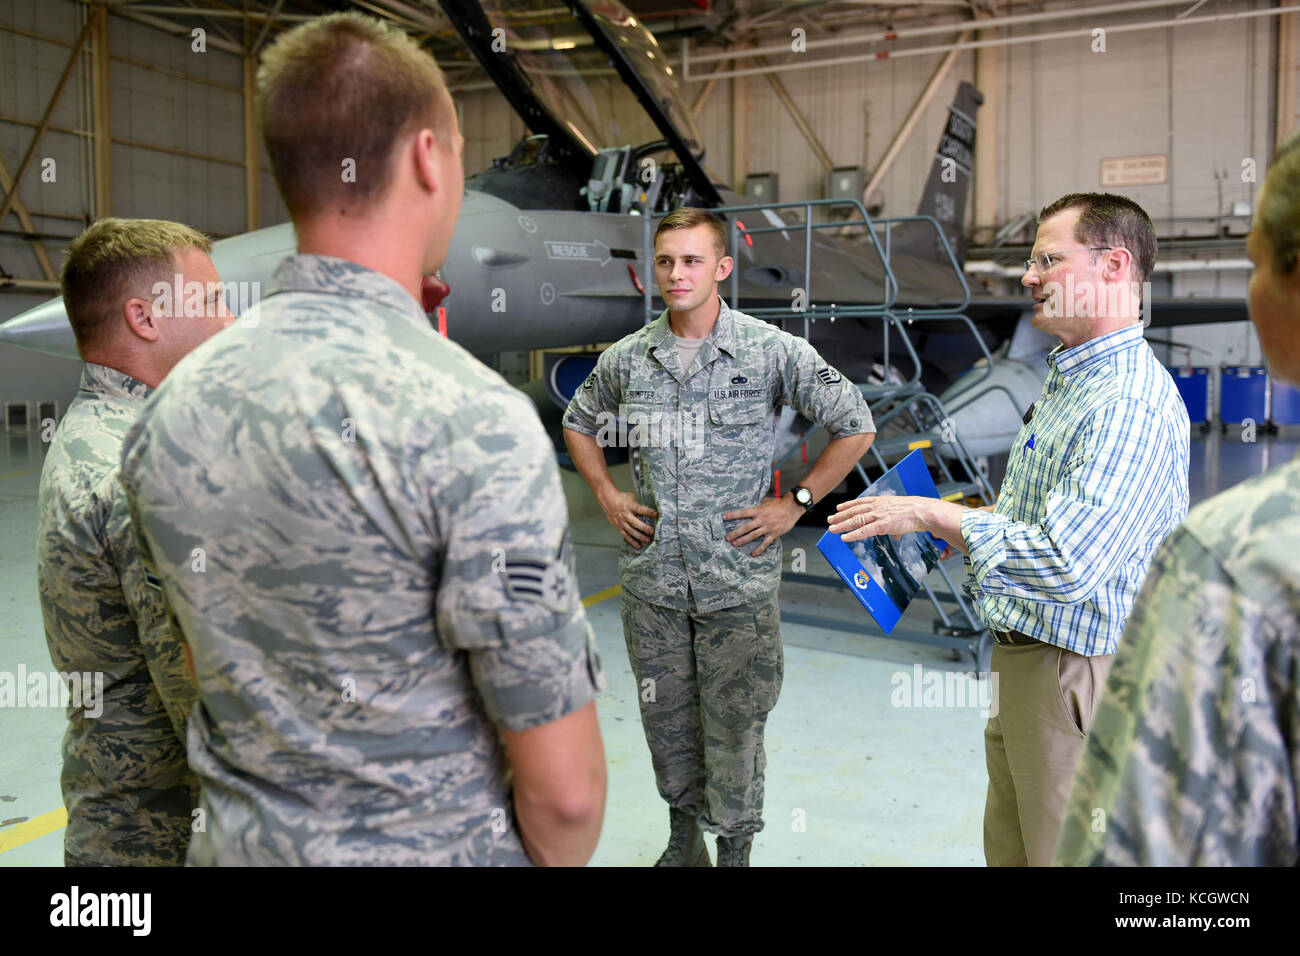 South Carolina Lieutenant Governor Kevin L. Bryant speaks with Airmen from the 169th Fighter Wing during his visit to McEntire Joint National Guard Base, July 21, 2017. Lt. Governor Bryant spoke with South Carolina Air and Army National Guard leadership about base missions and received a windshield tour of the installation with orientations of the various aircraft operated by South Carolina National Guard Airmen and Soldiers.  (U.S. Air National Guard photo by Master Sgt. Caycee Watson) Stock Photo